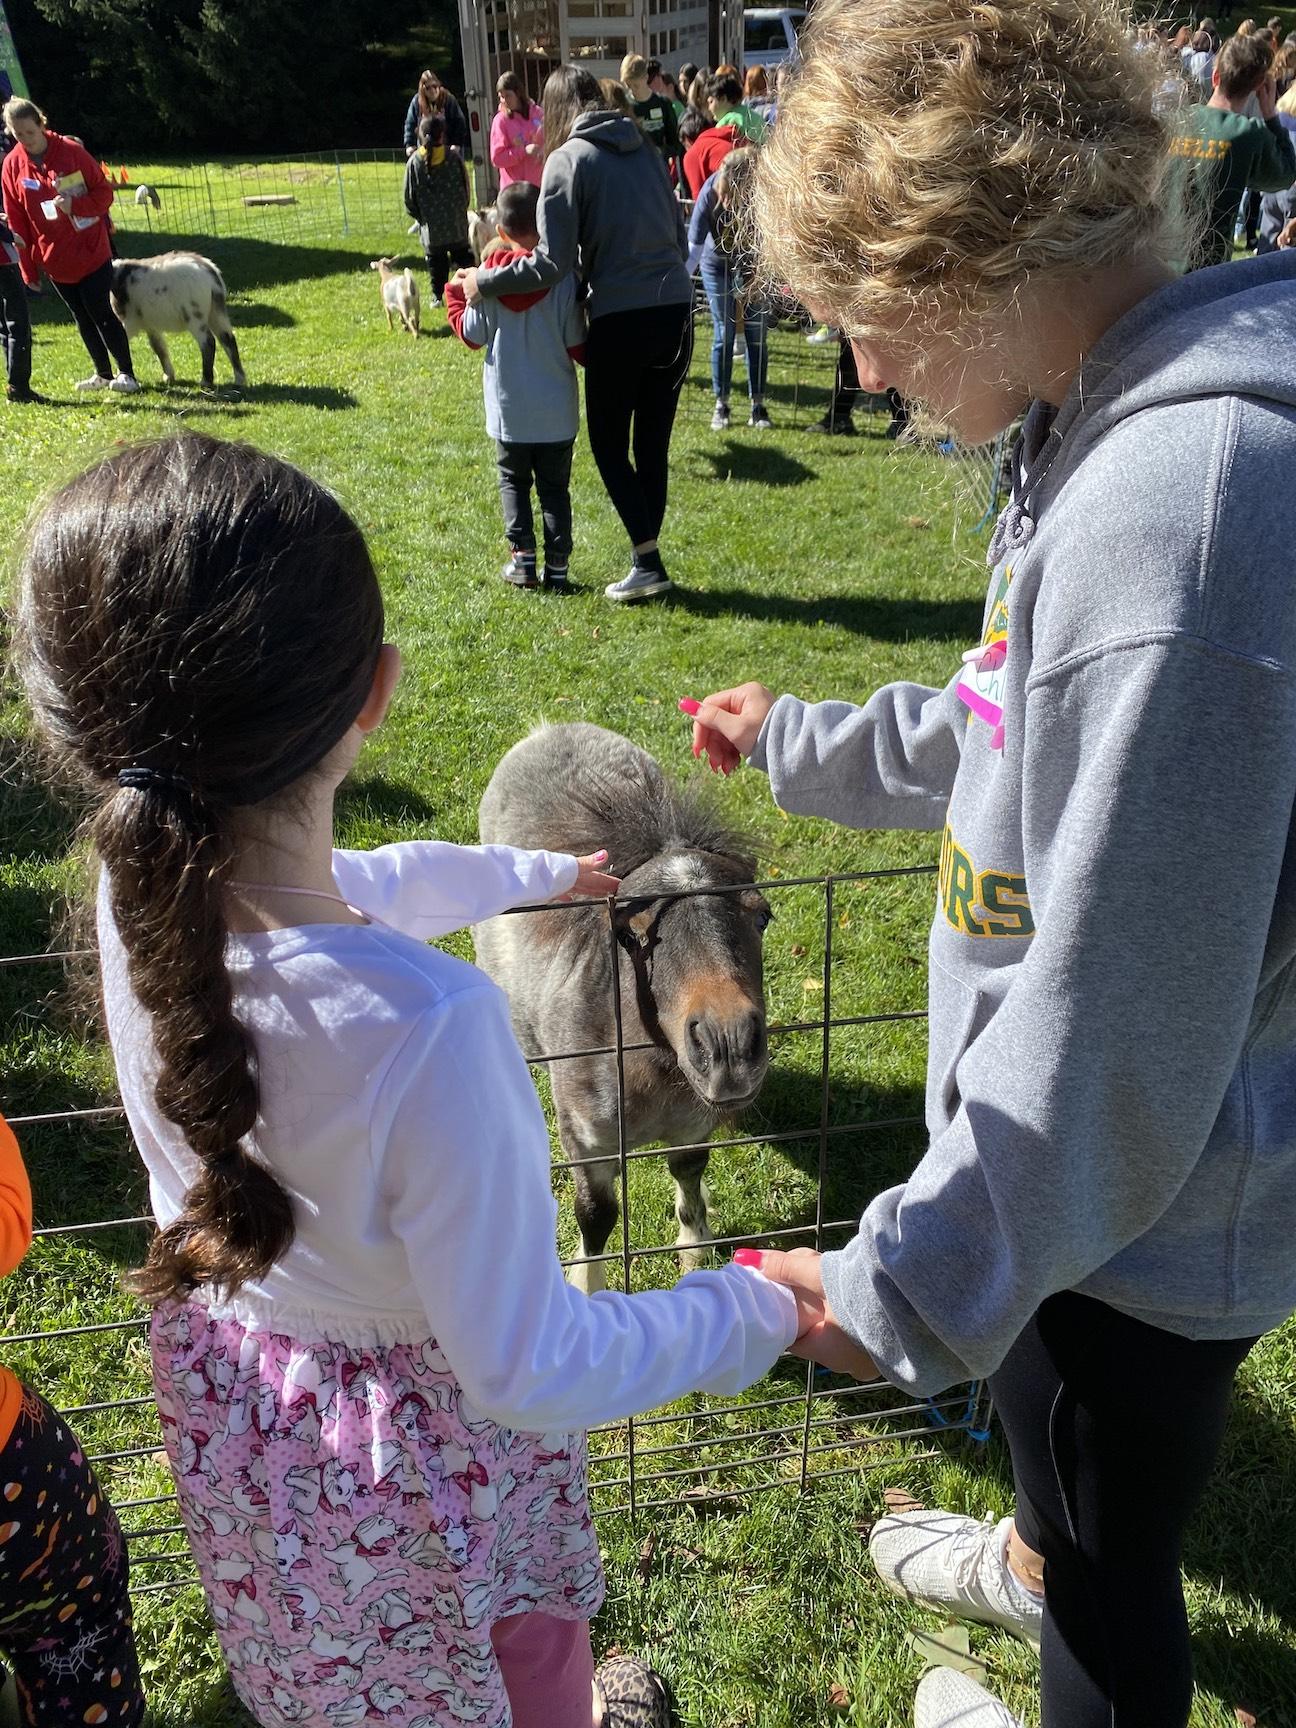 Izzy Parrendo (grade 4) and her buddy enjoy the petting zoo